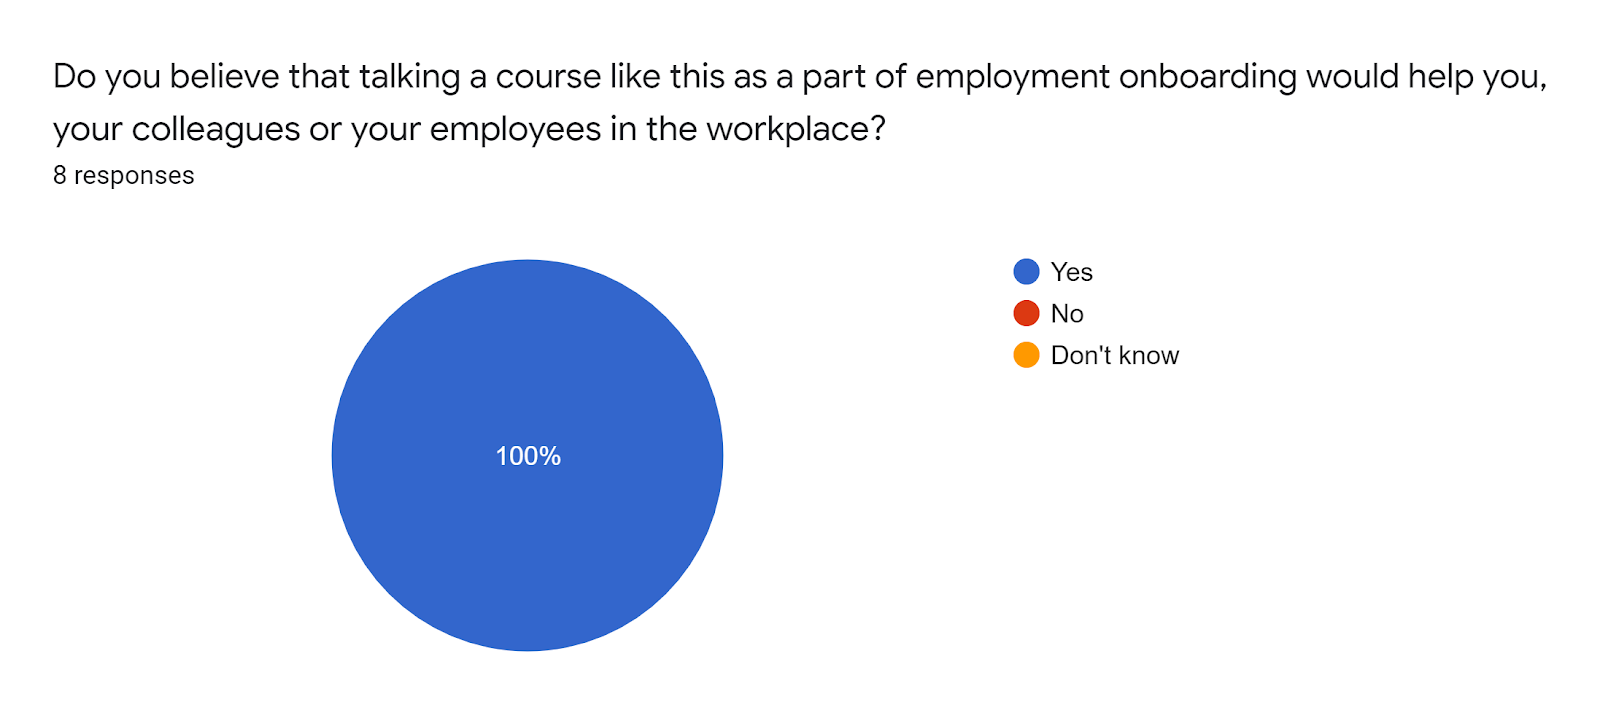 Forms response chart. Question title: Do you believe that talking a course like this as a part of employment onboarding would help you, your colleagues or your employees in the workplace?. Number of responses: 8 responses.